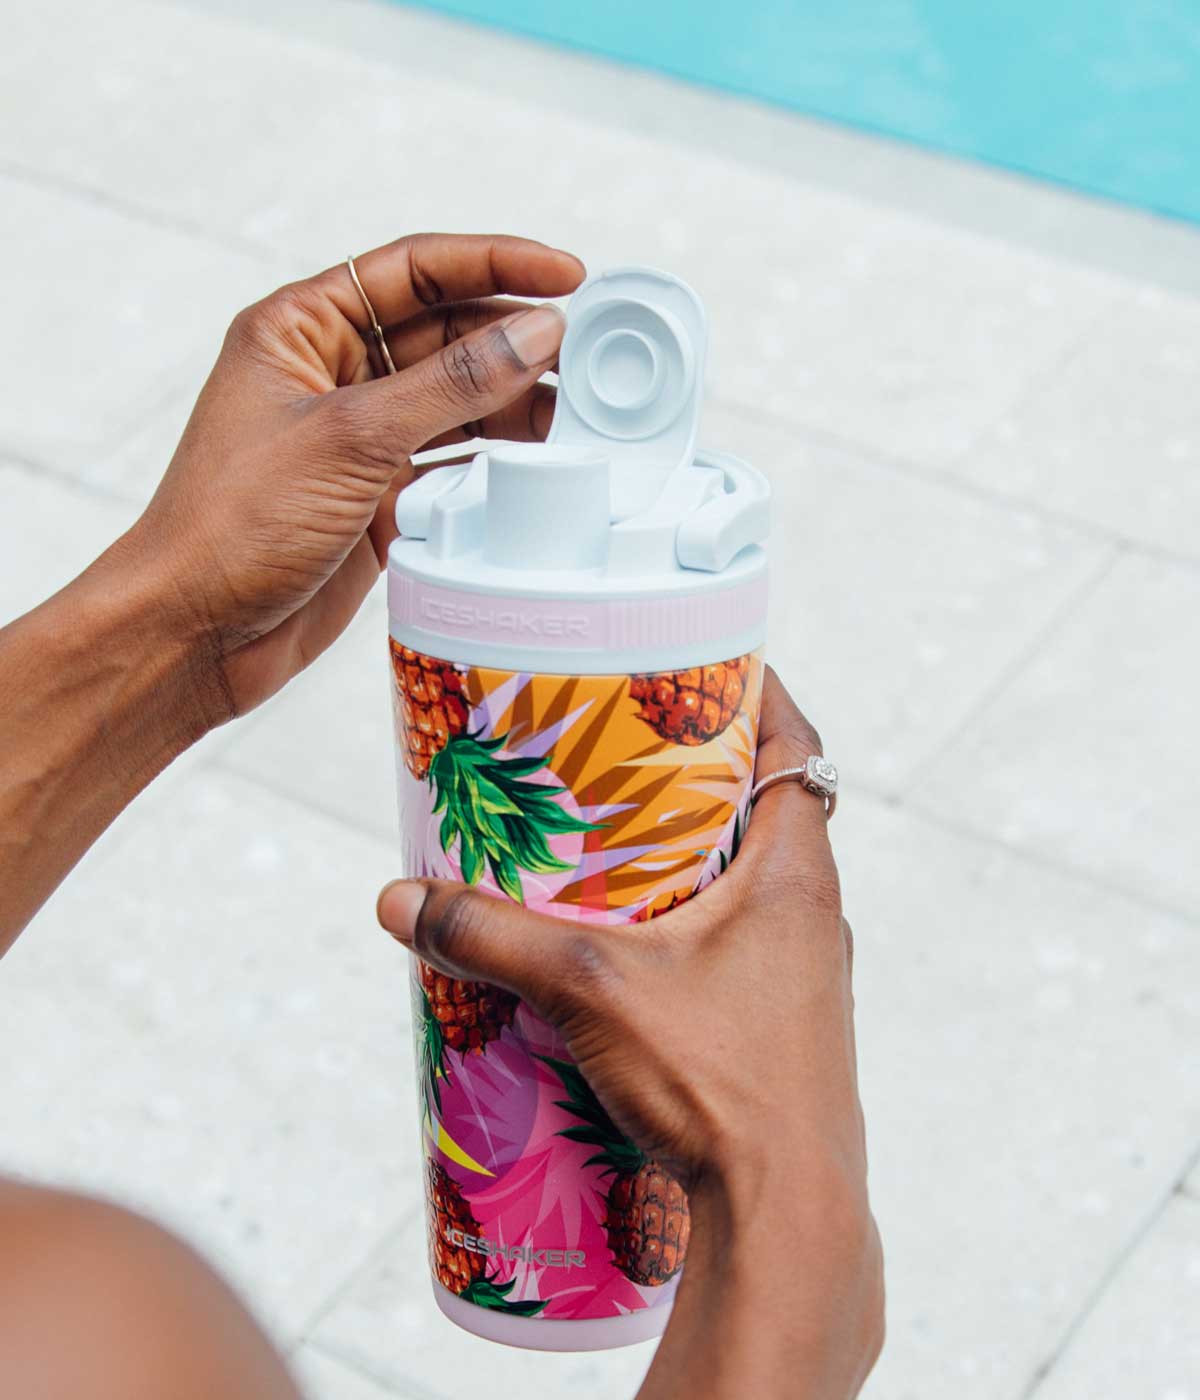 This image shows the Pineapple 26oz Ice Shaker being held by two feminine hands. One hand is lifting up the flap on the flip lid to take a drink from. A pool setting is in the background of the image.